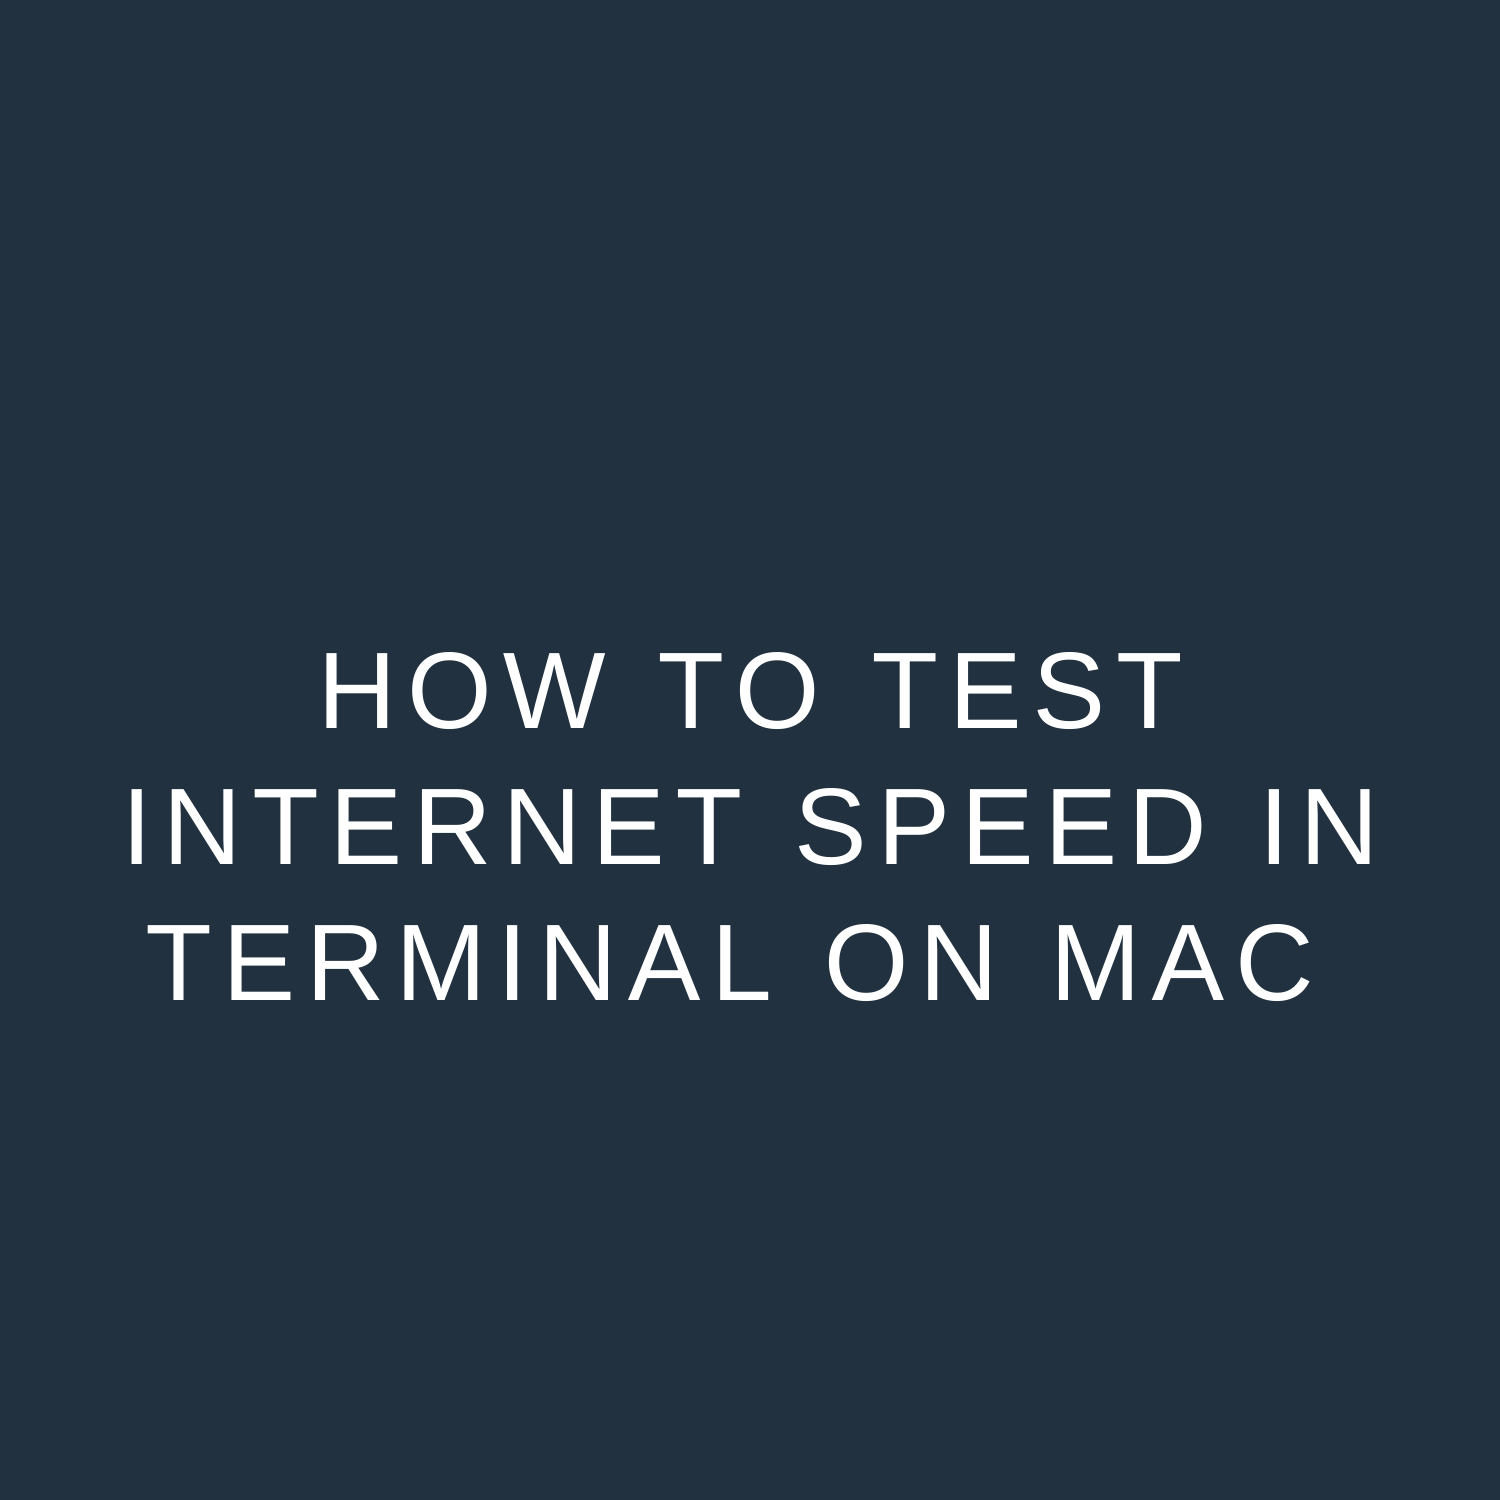 How to test internet speed in terminal on Mac